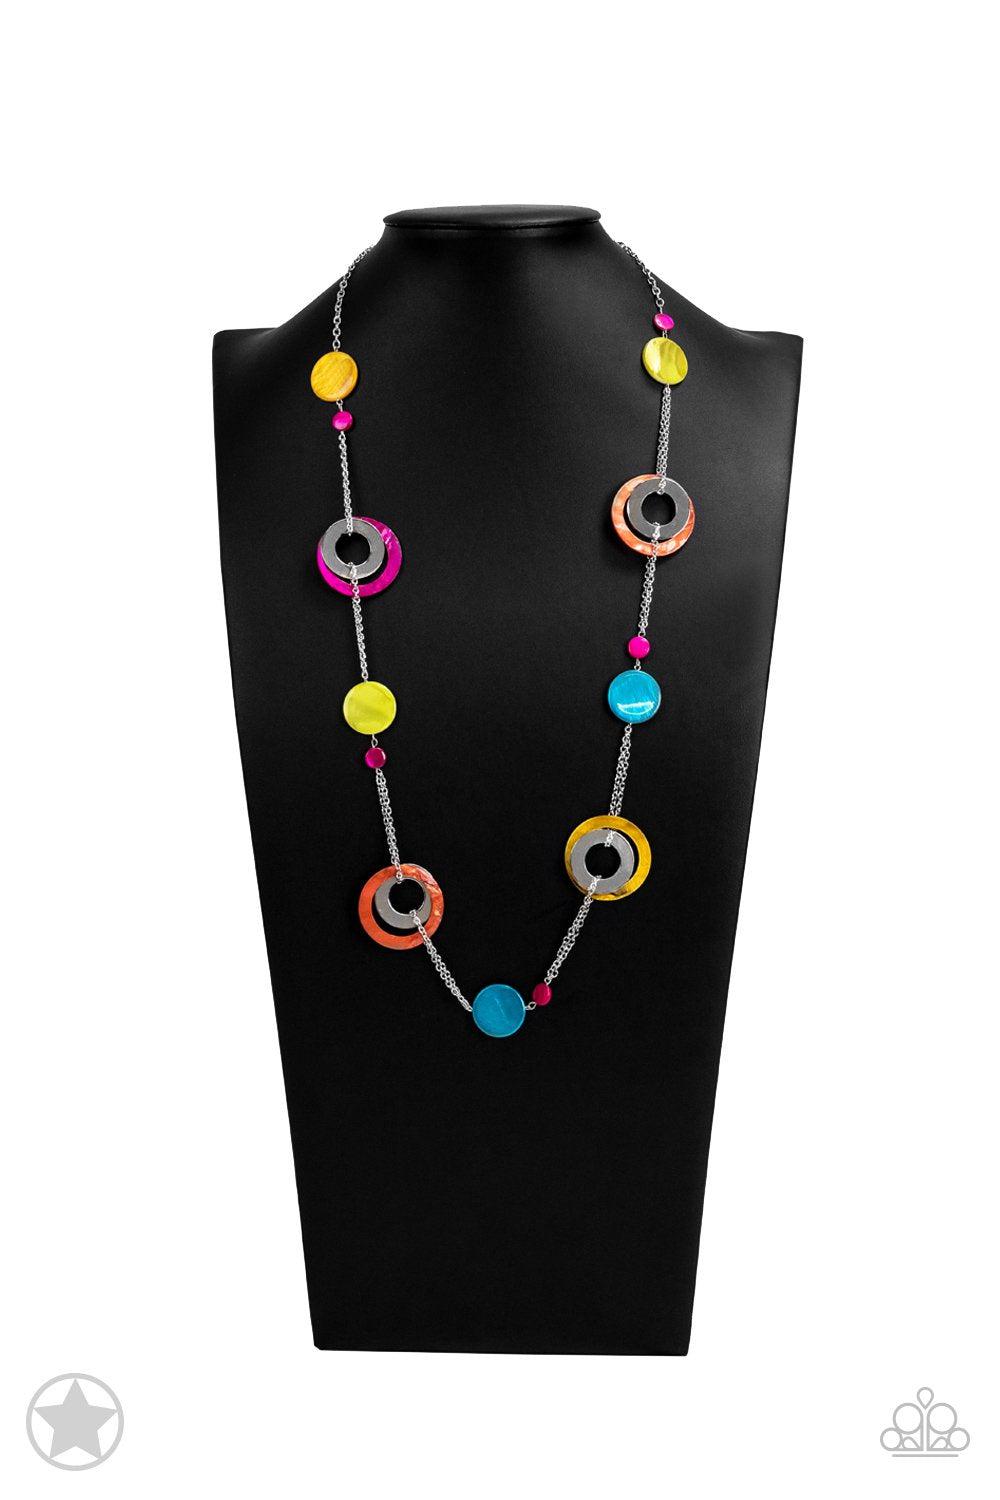 Kaleidoscopically Captivating Multi-color Necklace - Paparazzi Accessories- on bust -CarasShop.com - $5 Jewelry by Cara Jewels